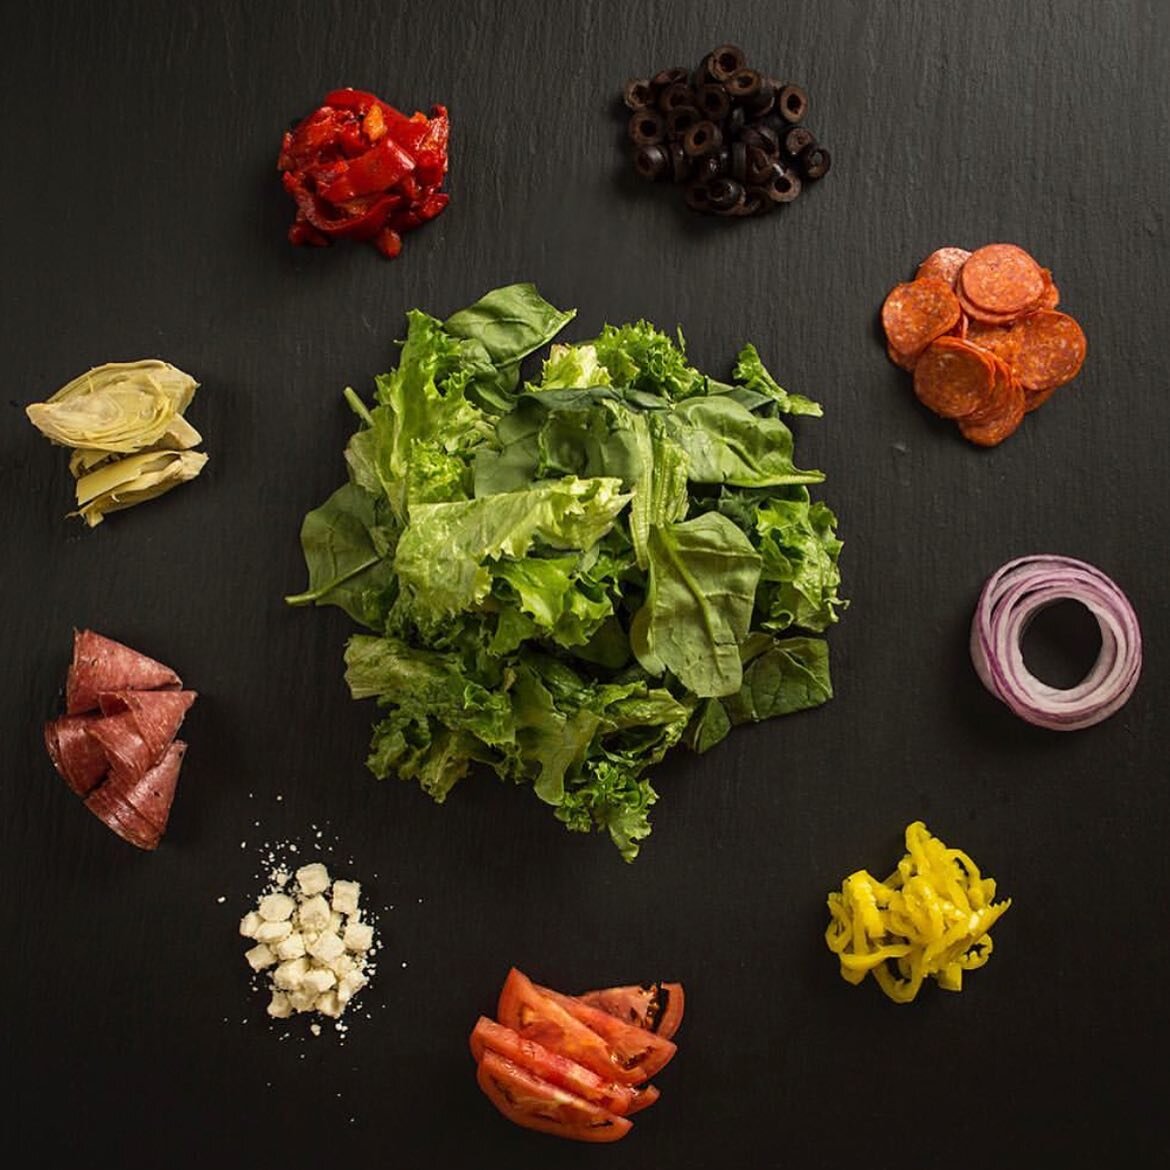 Put all these ingredients together and you get an Antipasto Salad! 🥗

#sliceonbroadway #beechview #carnegie #shadyside #pittsburghpizza #local #dailypizzapic #instapizzas #eatpizzaeveryday #instafood #foodiegram #ronicups #eatpgheats #pittsburghfood